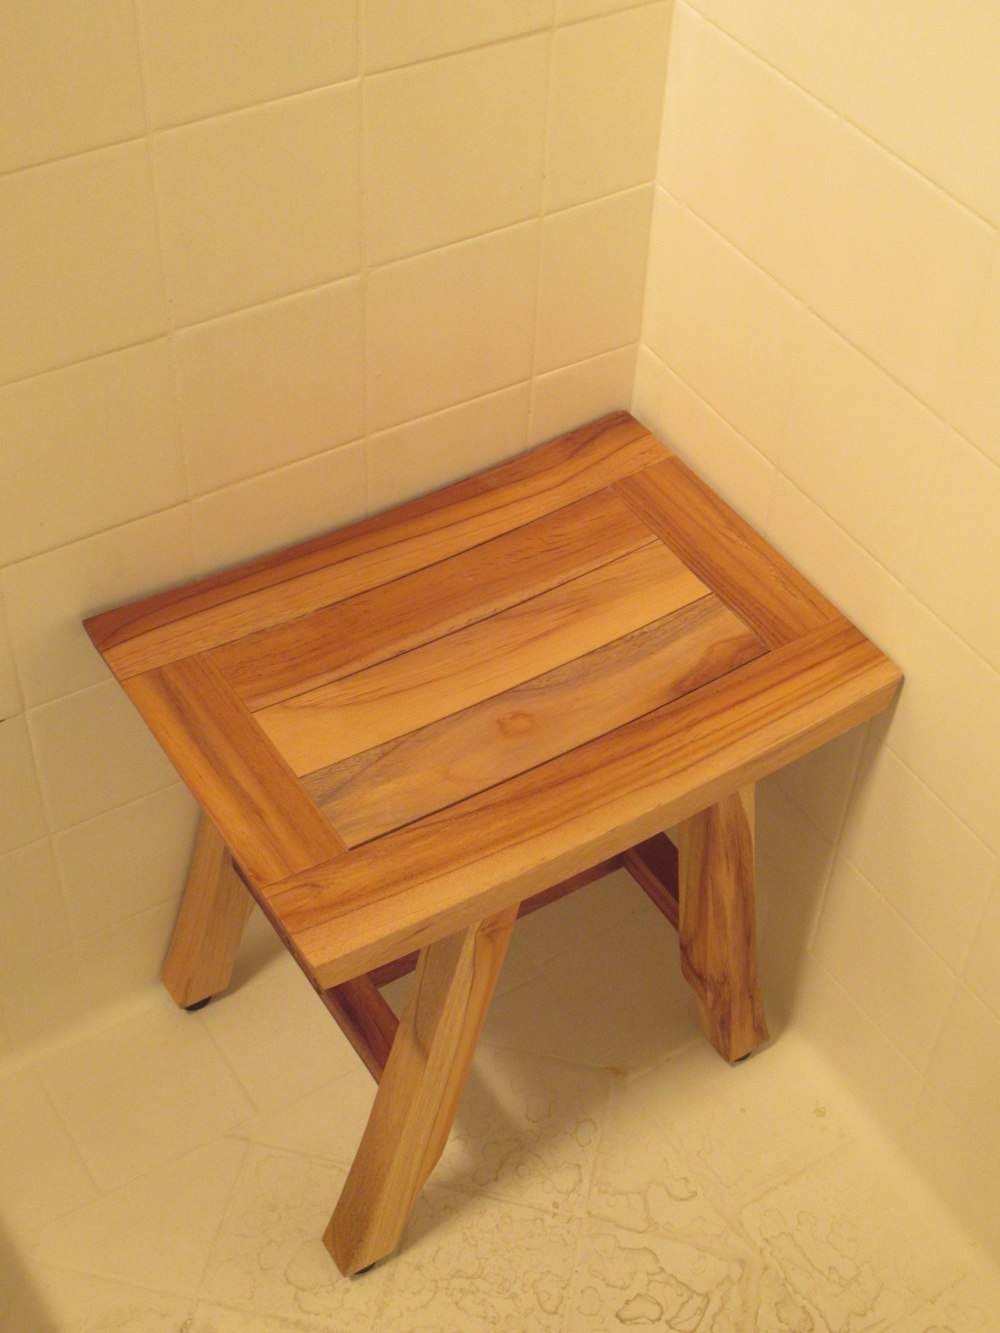 a small wooden table sitting in a bathroom